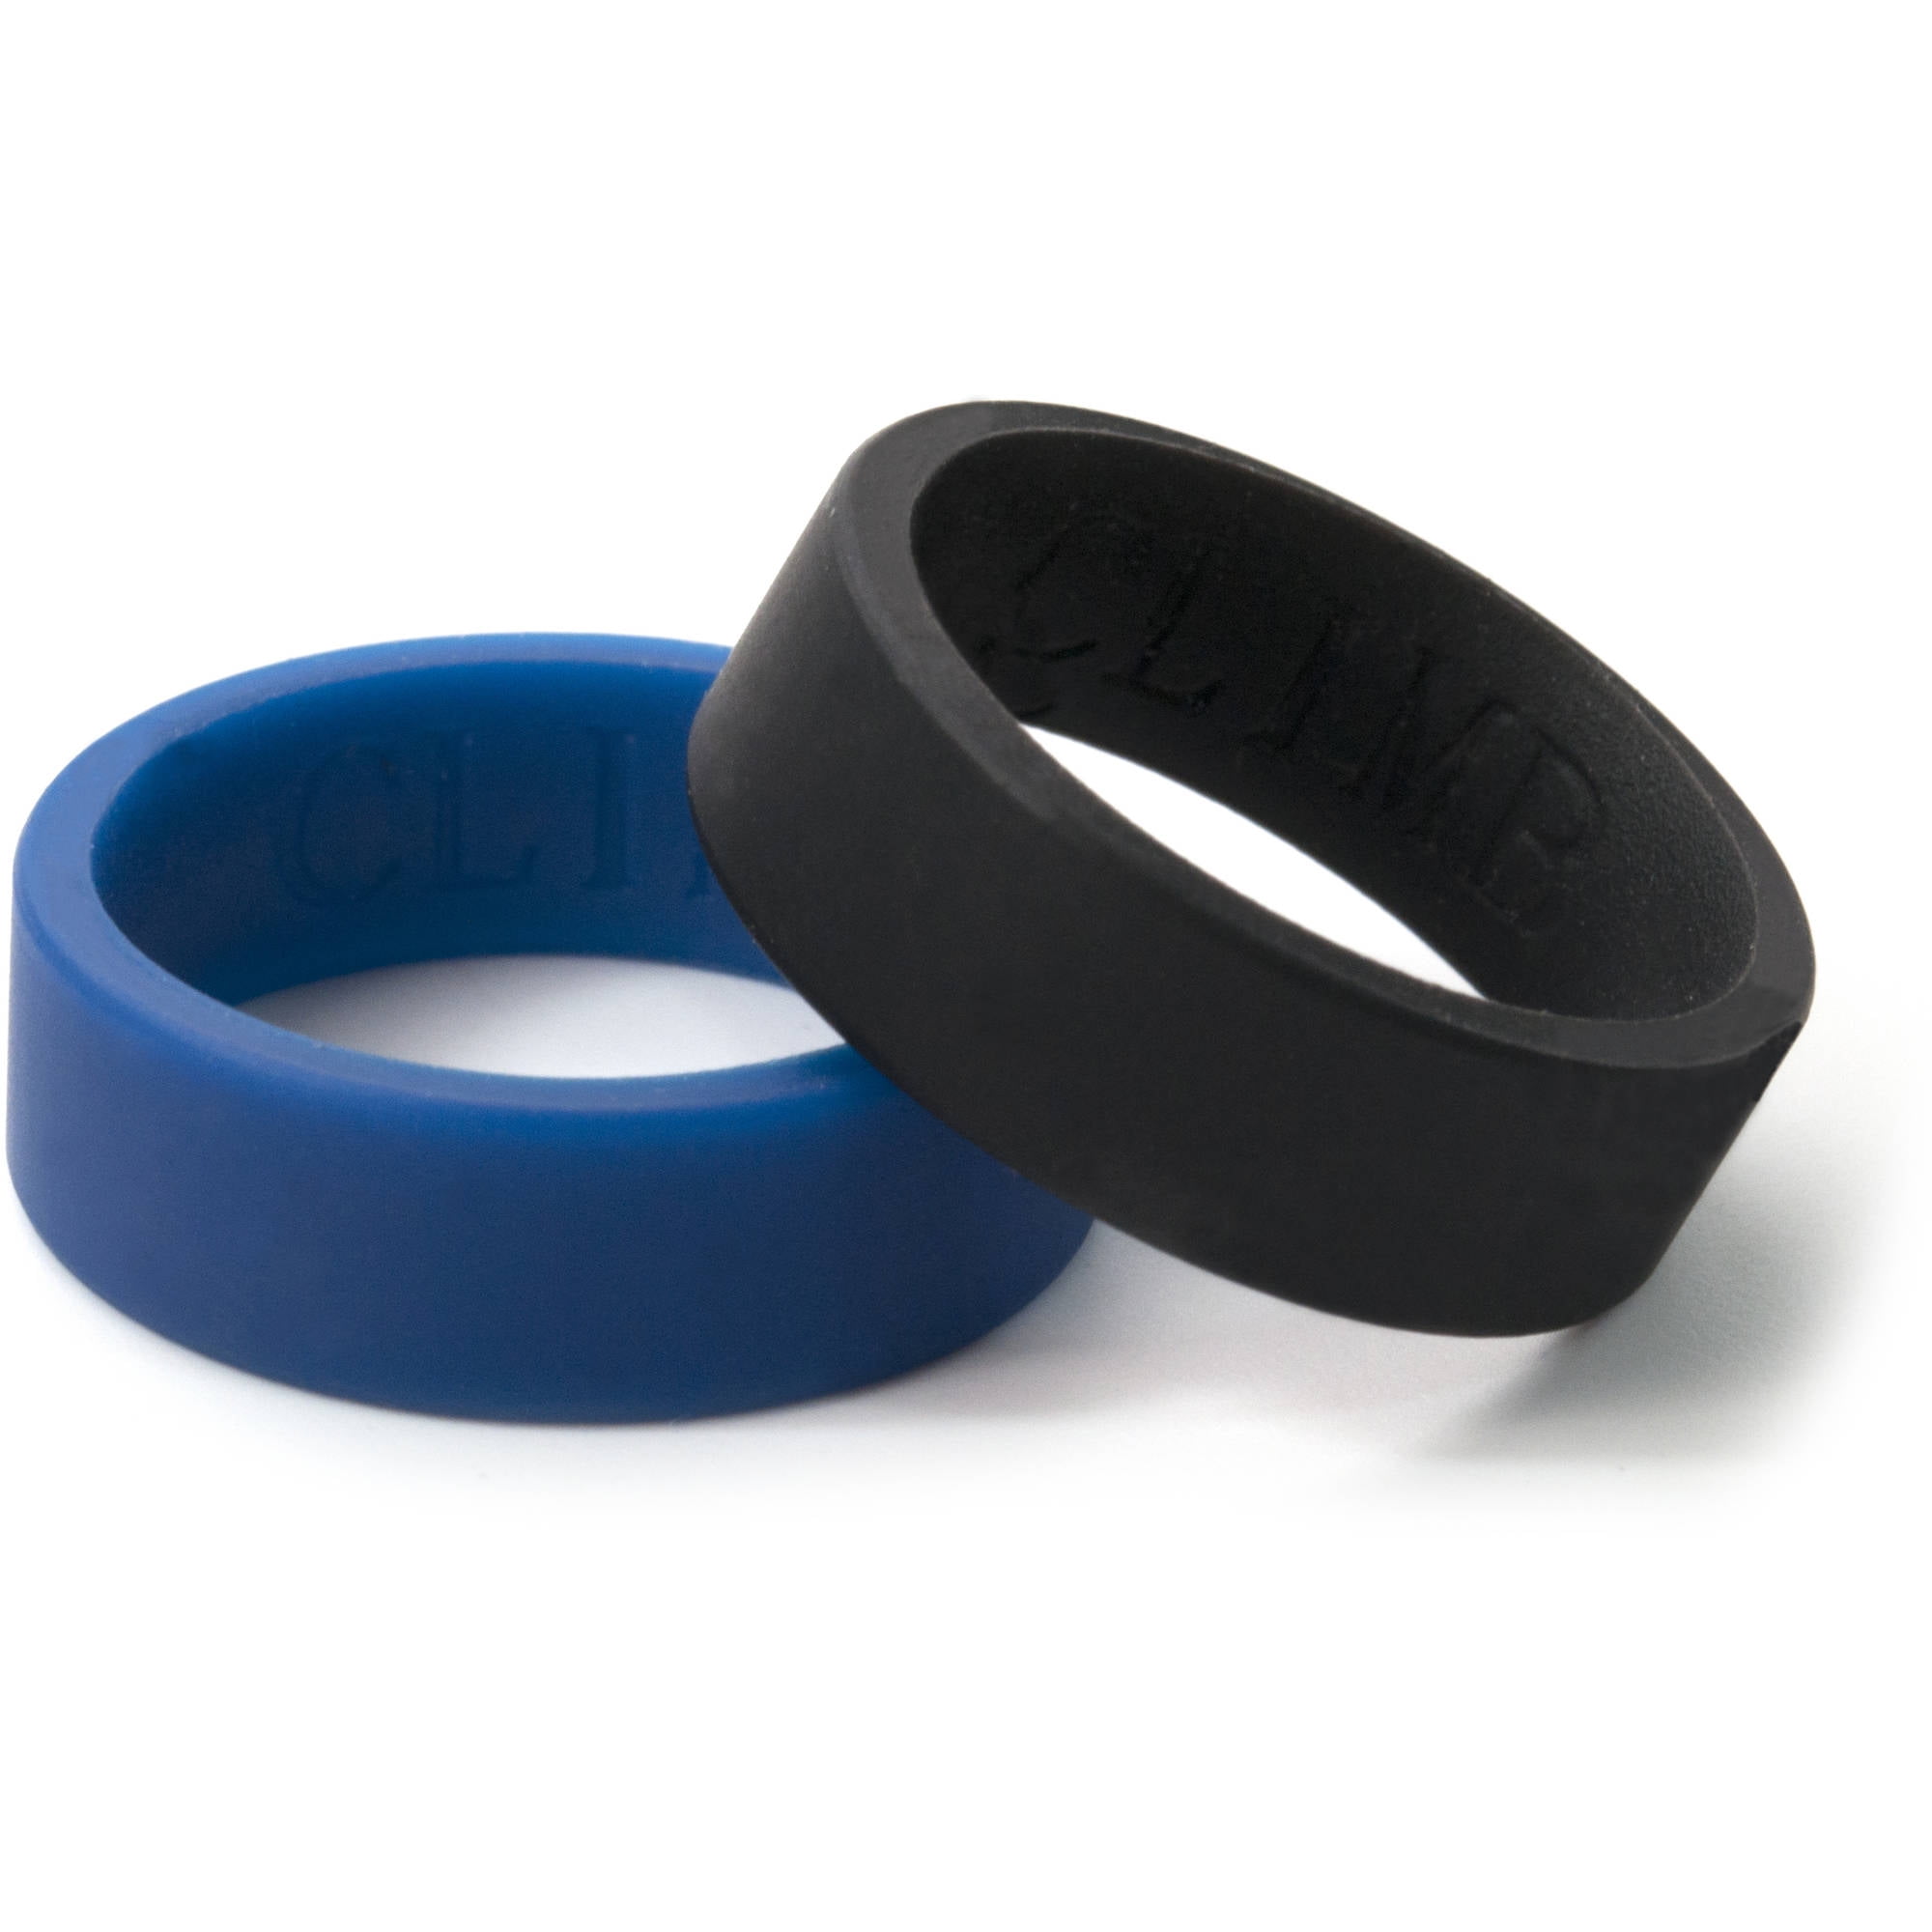 YesFit Silicone Rings Lot Of 2 Size 12 Black and Navy Blue New 